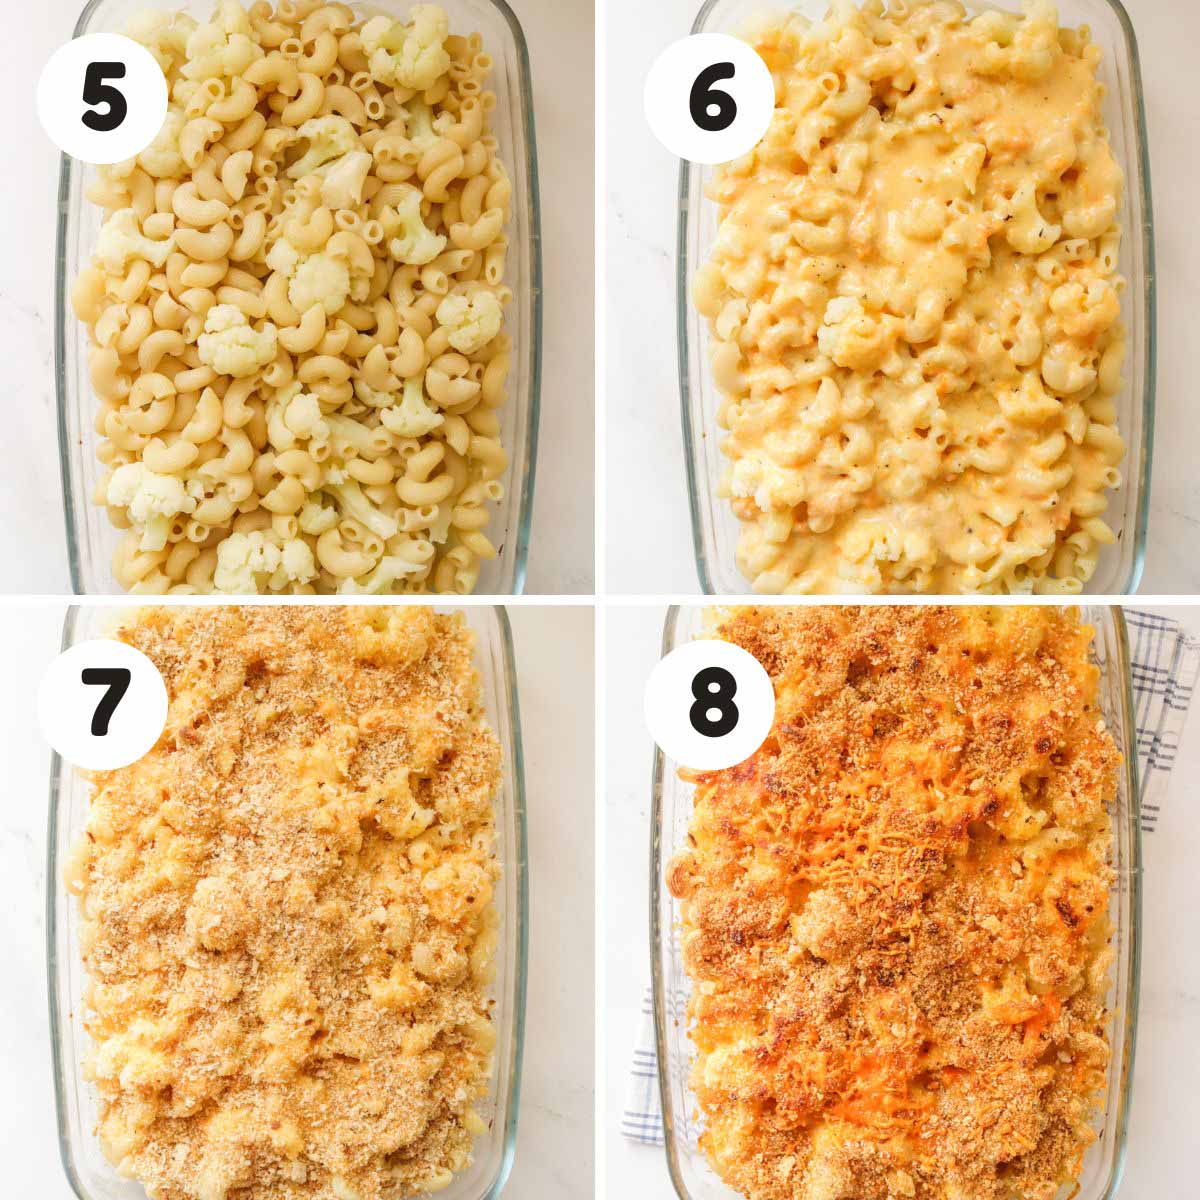 Steps to bake the mac and cheese.